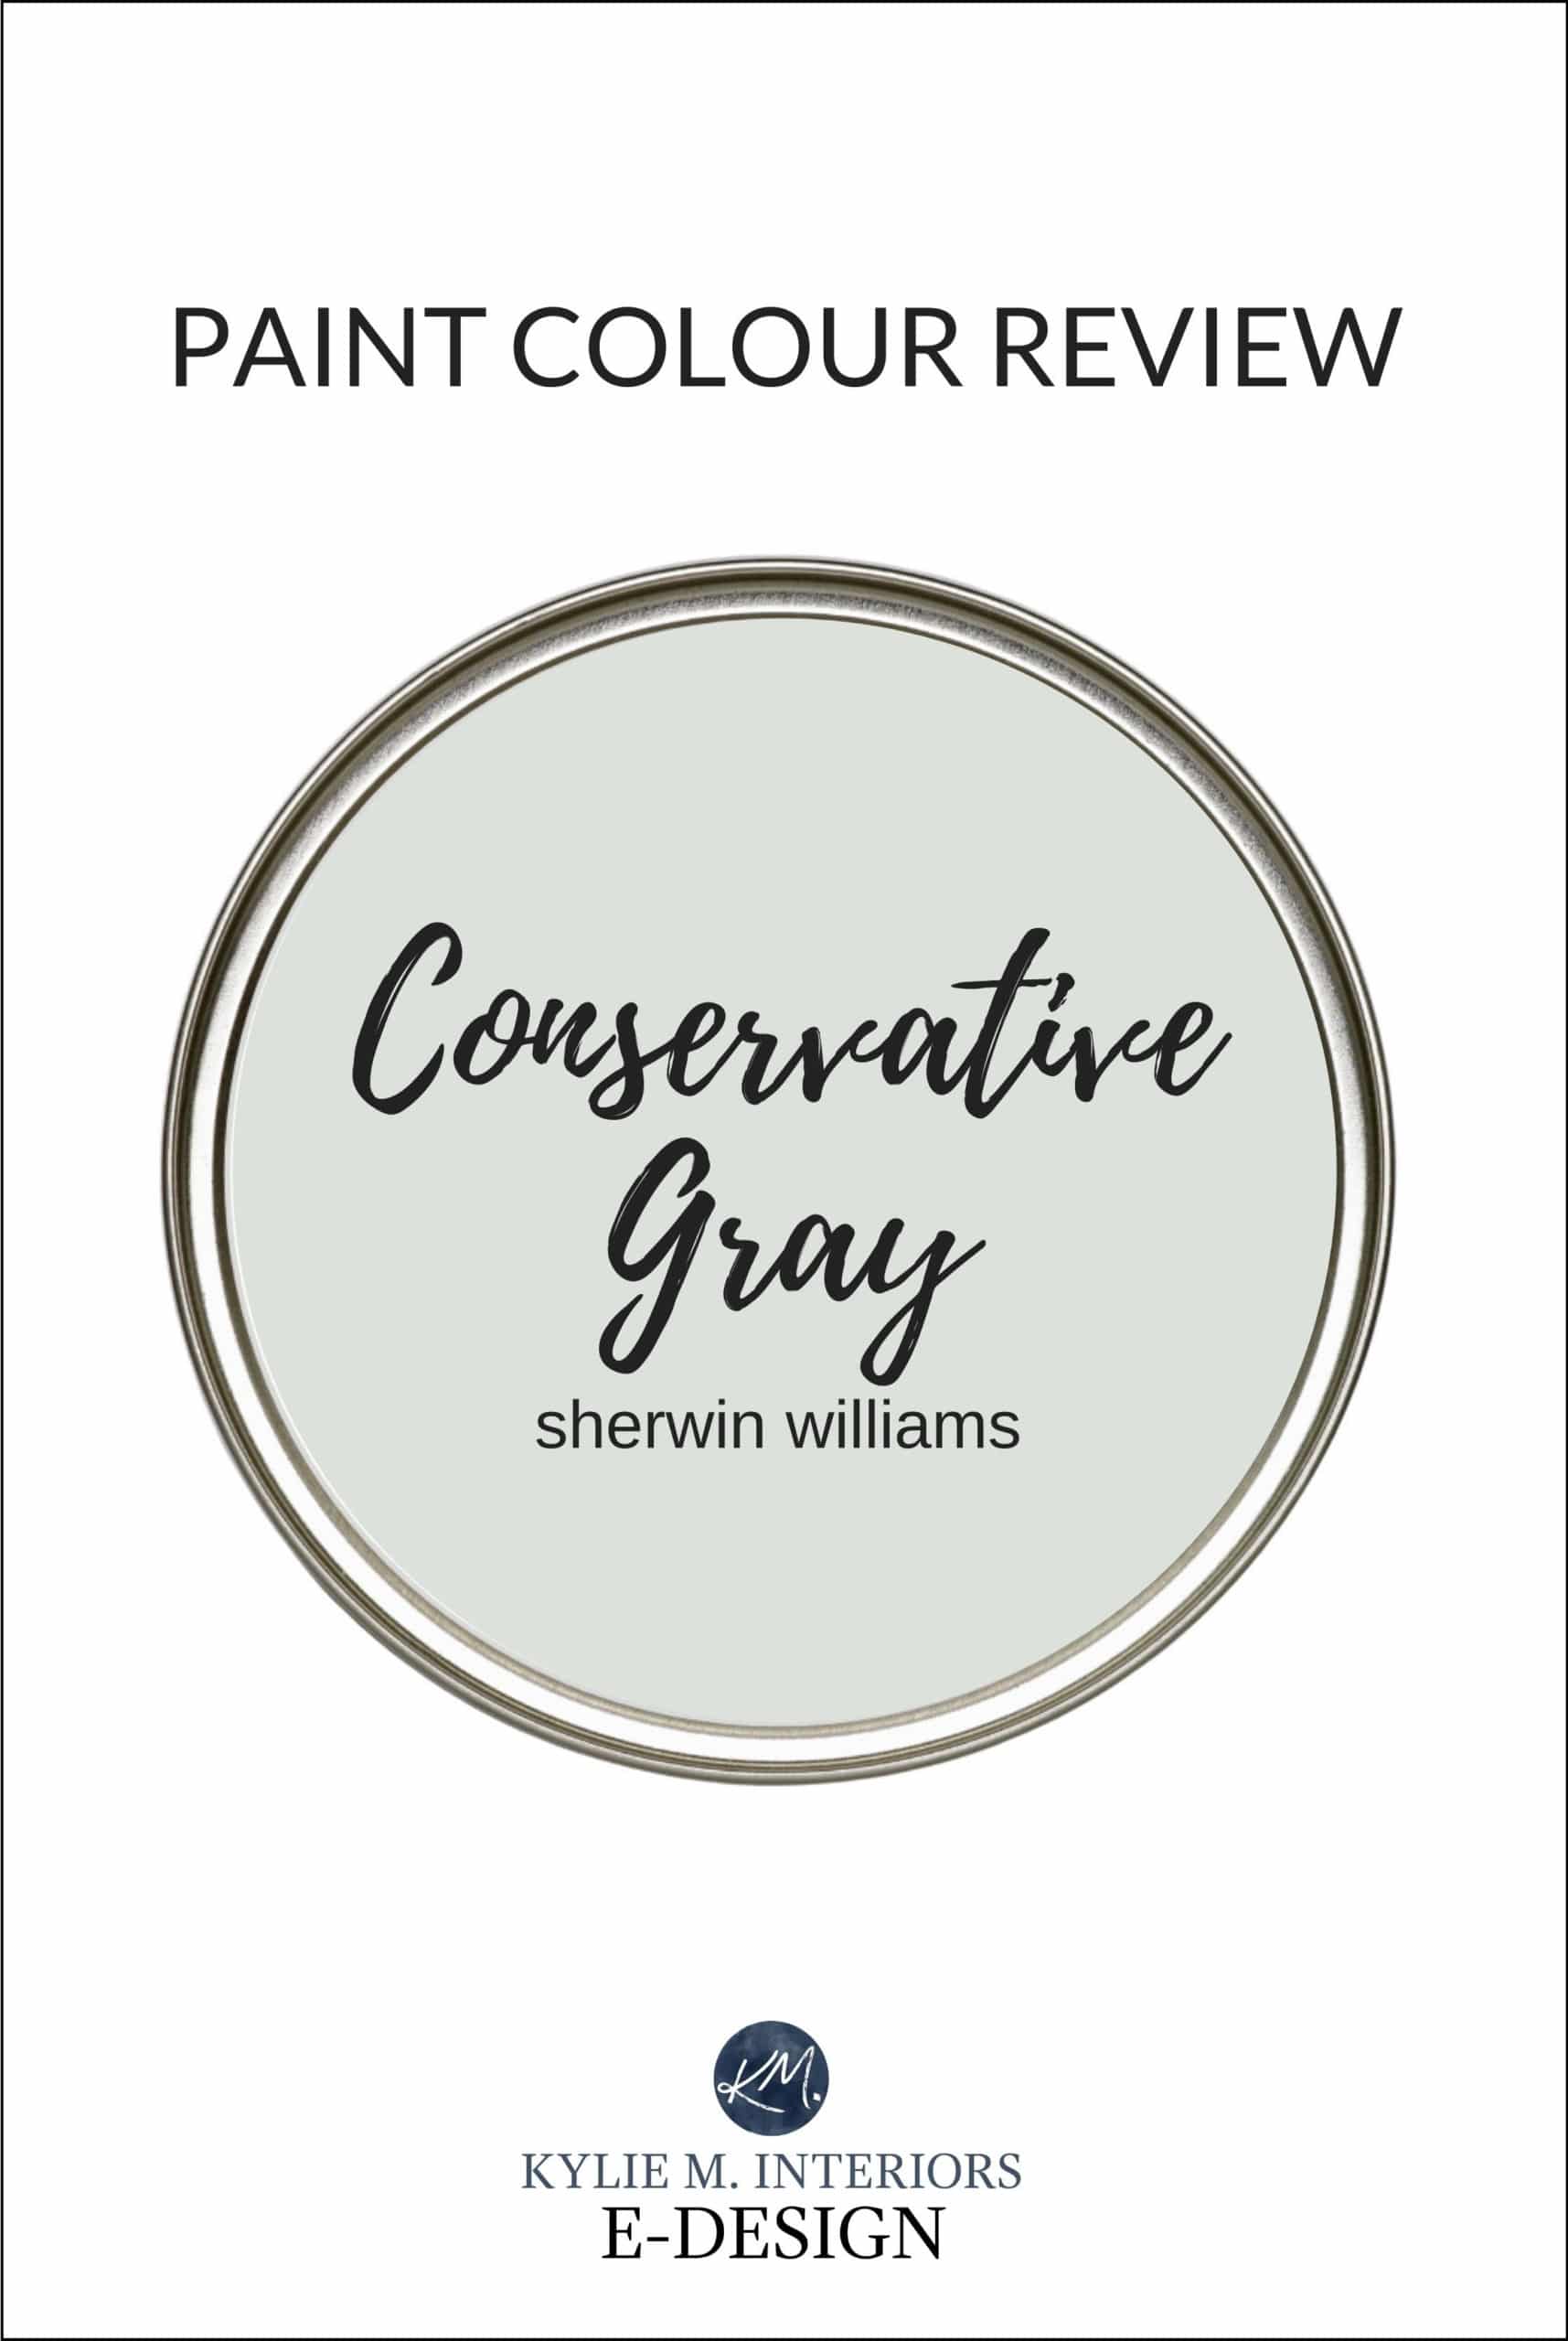 Paint colour review of best gray green paint colour, Sherwin Williams Conservative Gray. Kylie M Interiors Edesign, online paint color consulting and diy decorating advice